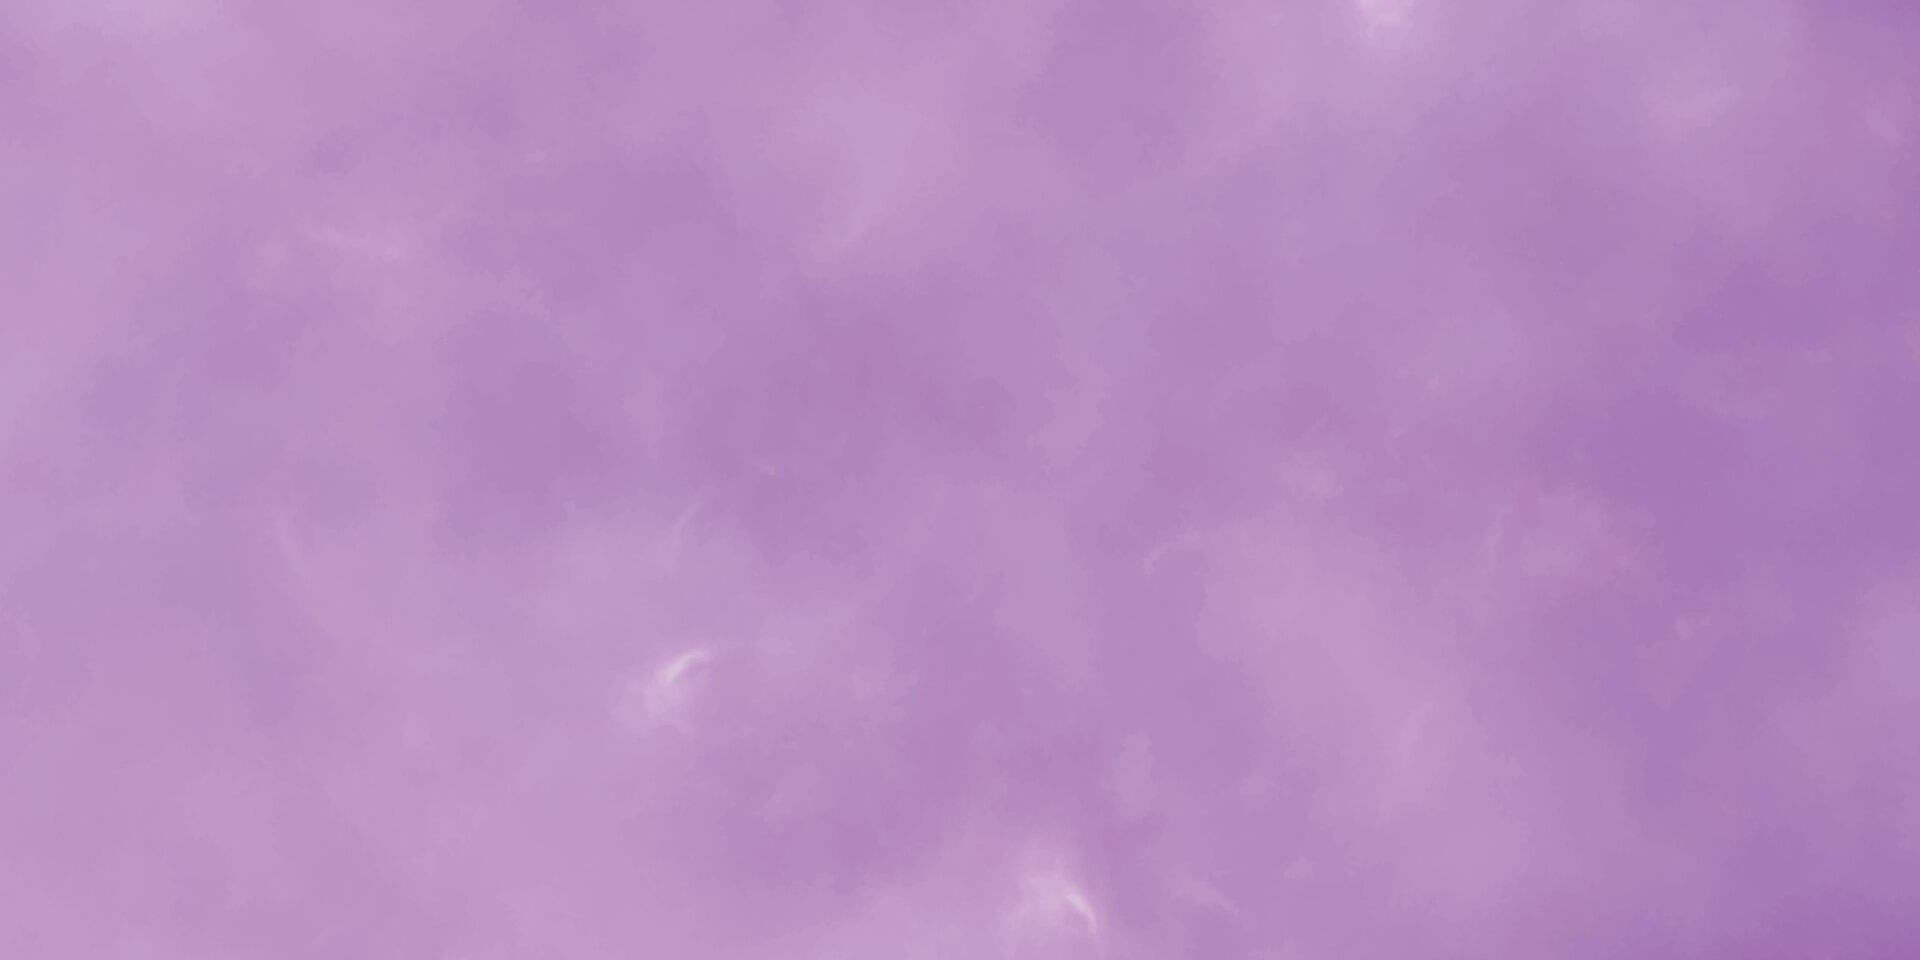 Soft light watercolor background. Purple, pink watercolor background texture. vector